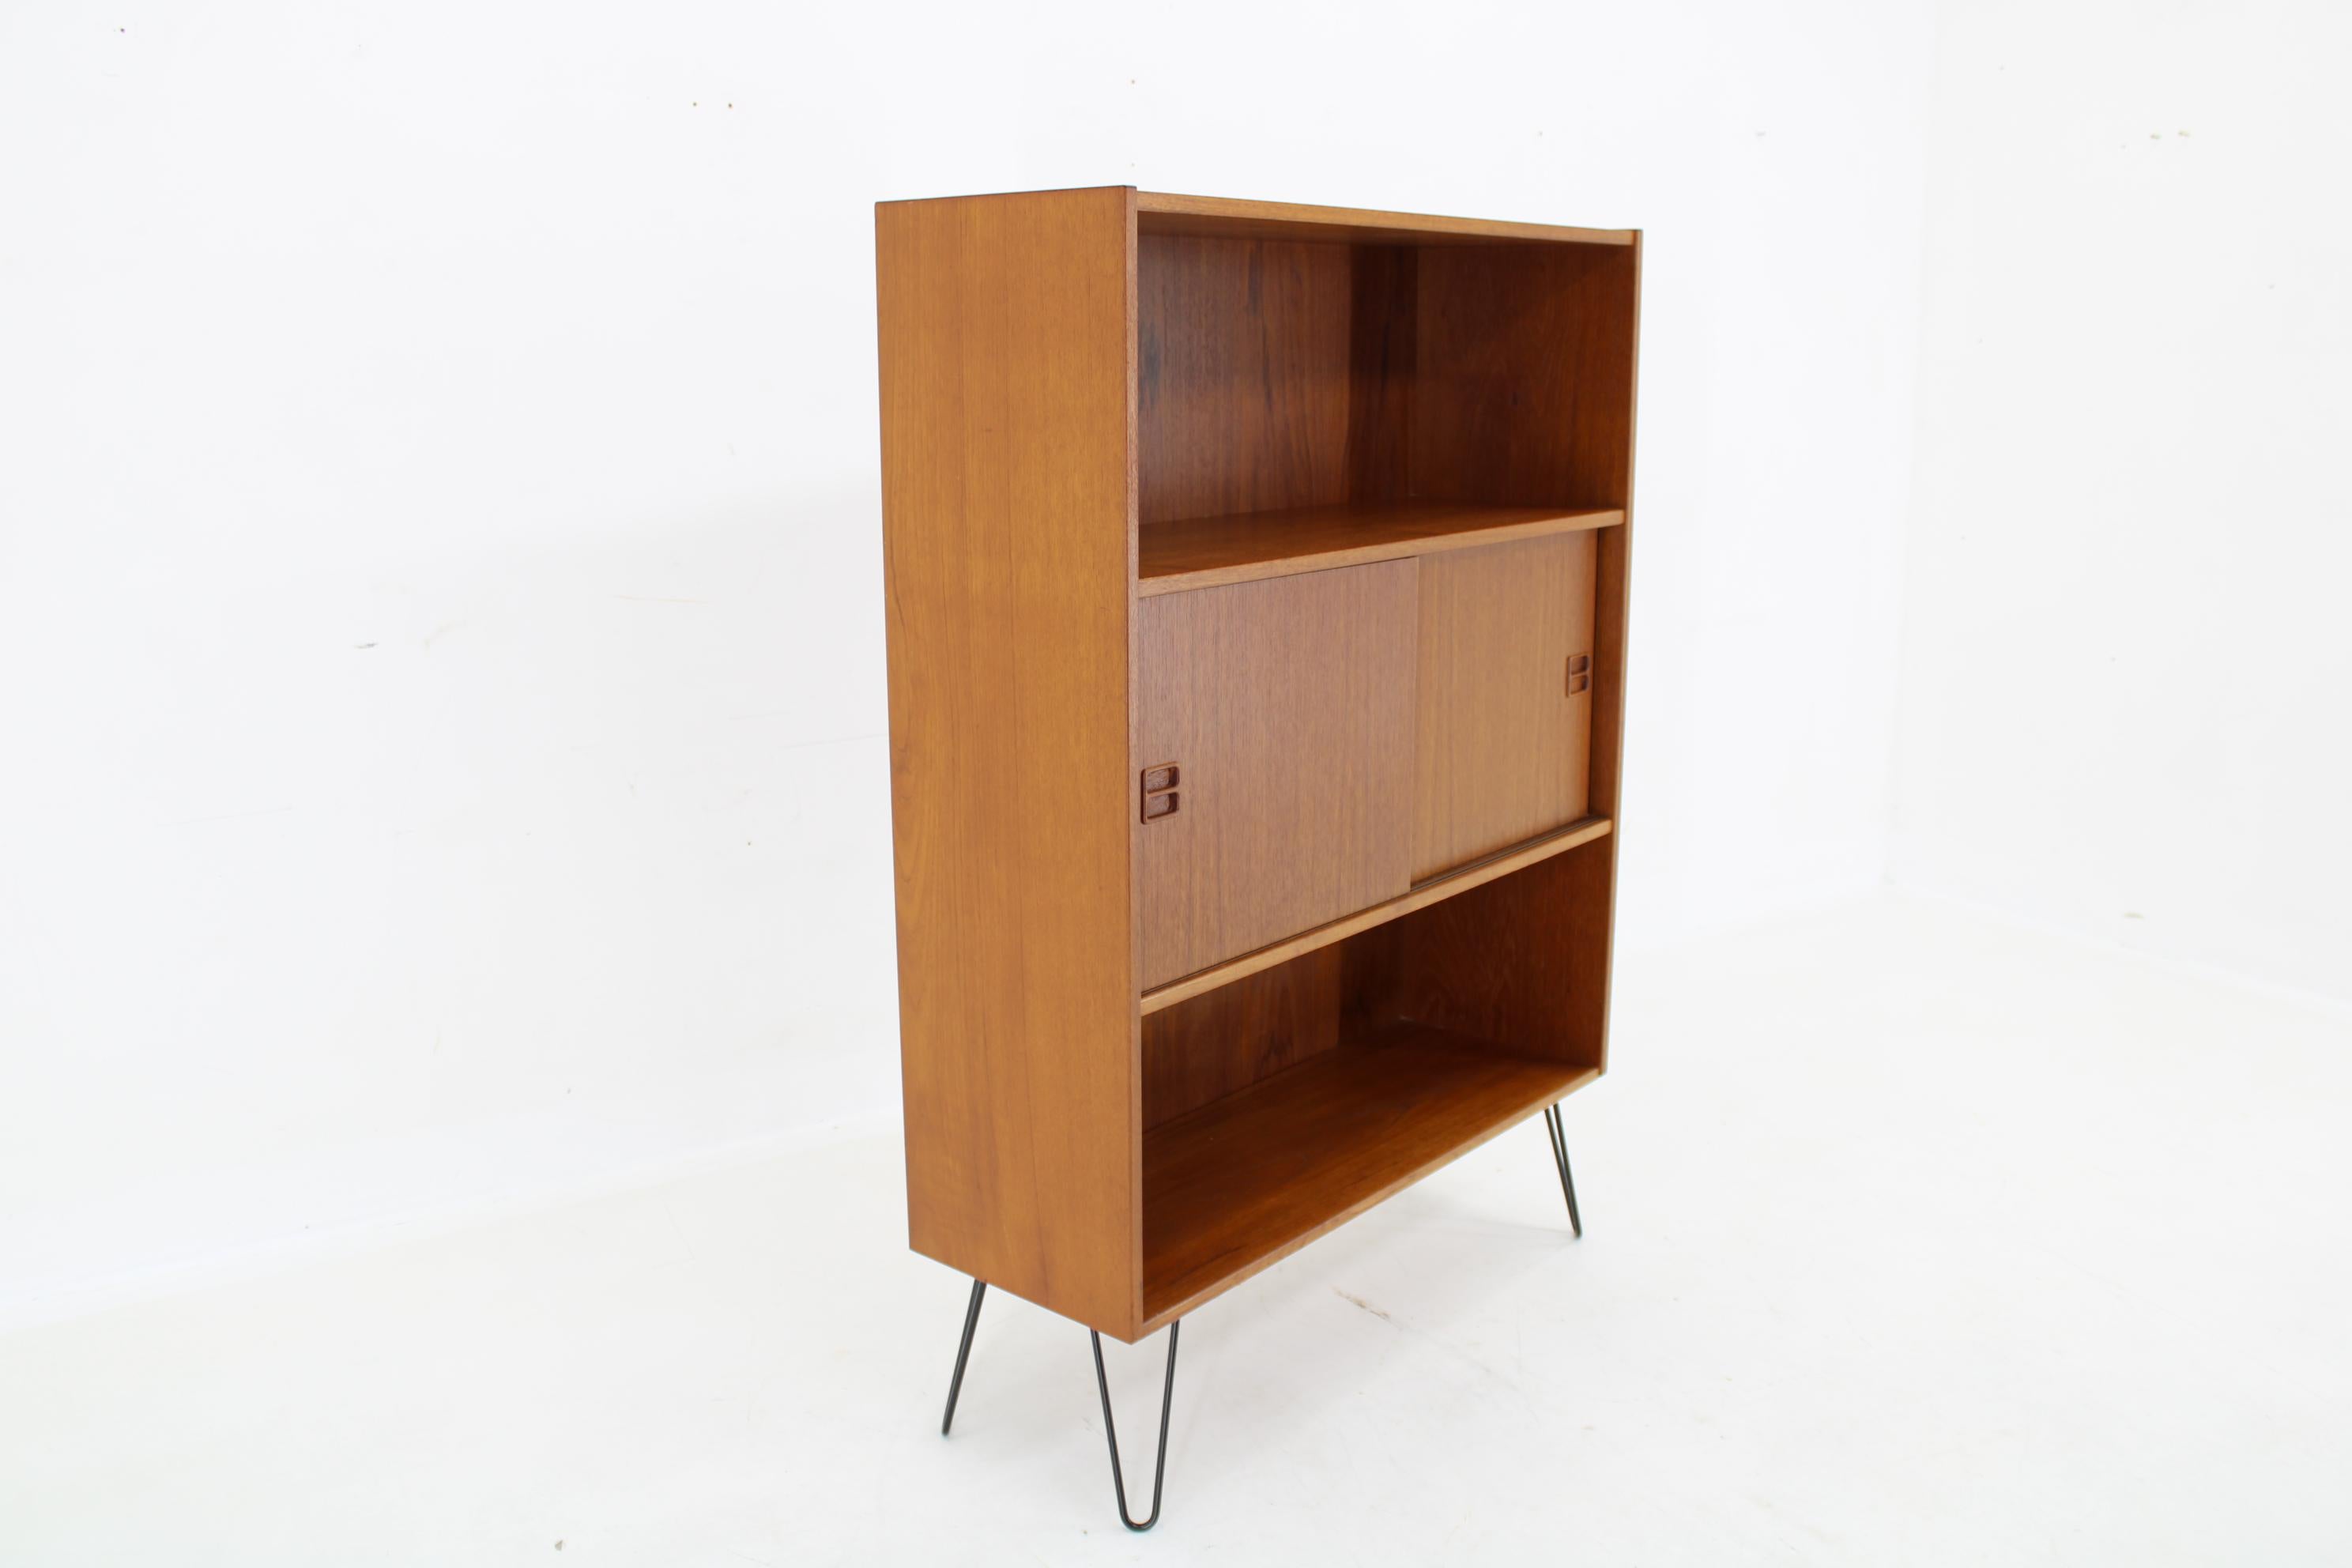 1960s Upcycled Bookcase with Sliding Doors, Denmark For Sale 3